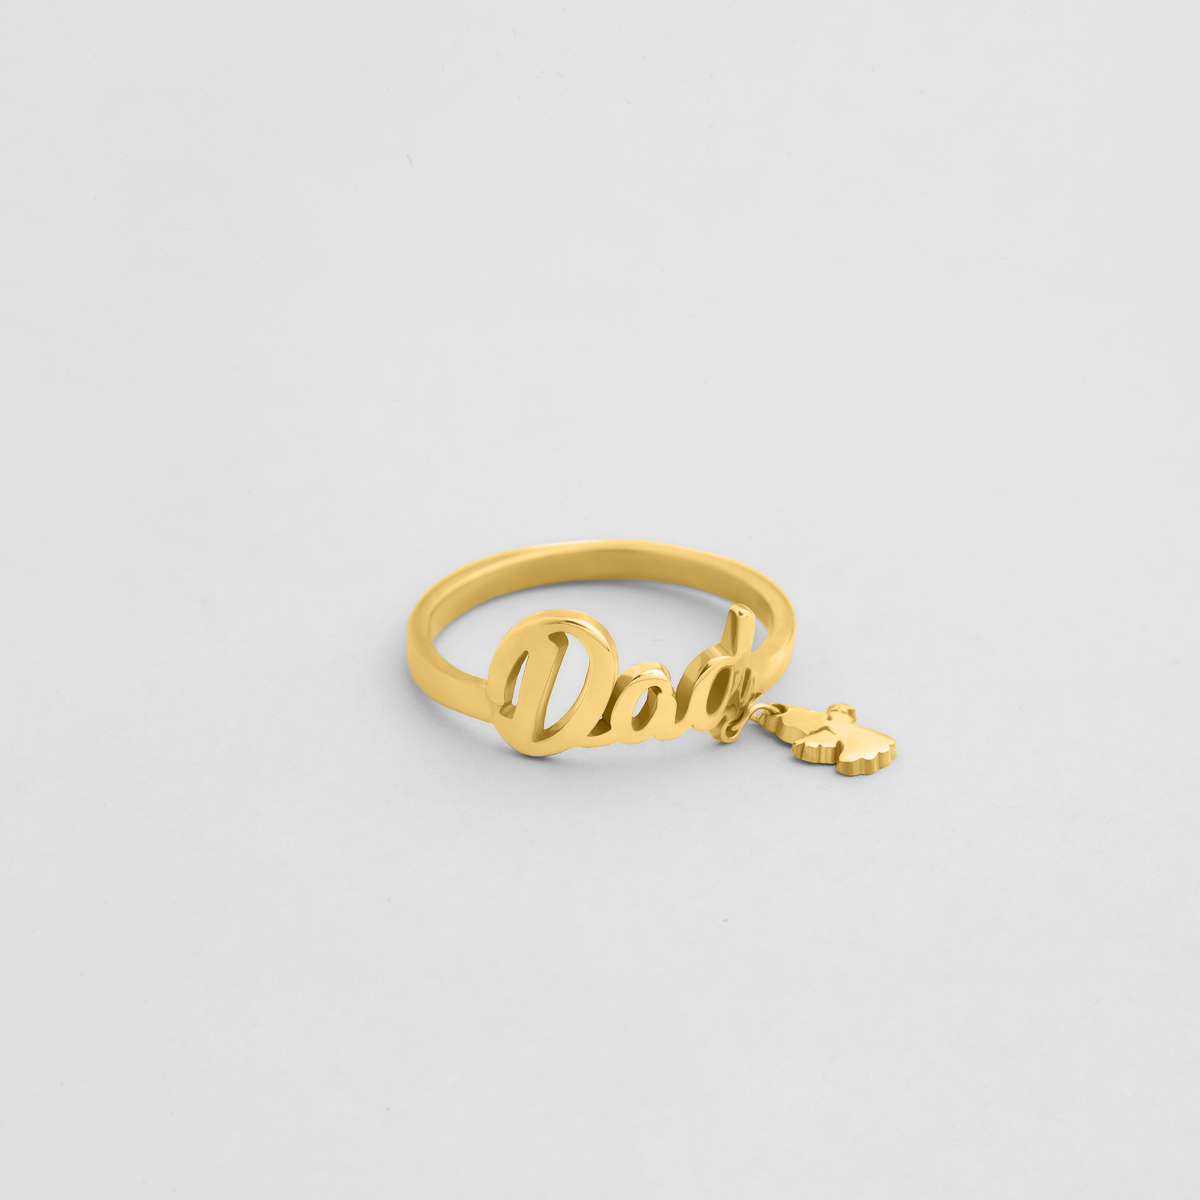 Buy Two Finger Ring Gold: Custom Knuckle Ring Name Jewelry Personalized Name  Ring for Women, Teenage, Girls, Girlfriend Double Finger Band Online in  India - Etsy